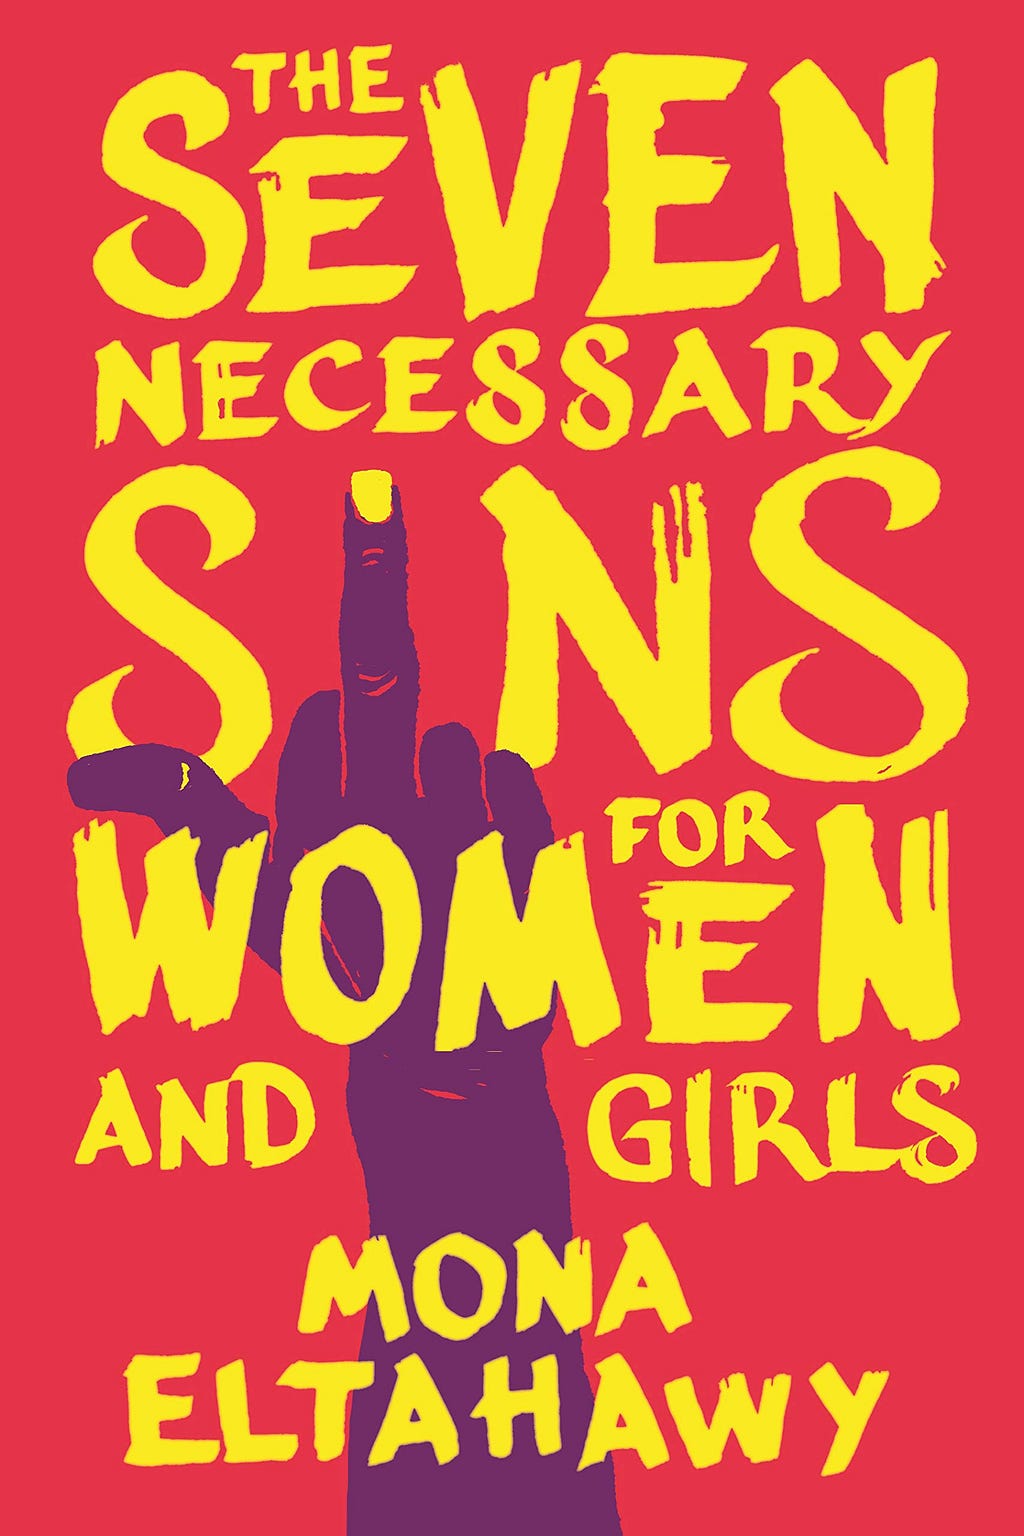 Cover of “The Seven Necessary Sins for Women and Girls” by Mona Eltahawy.